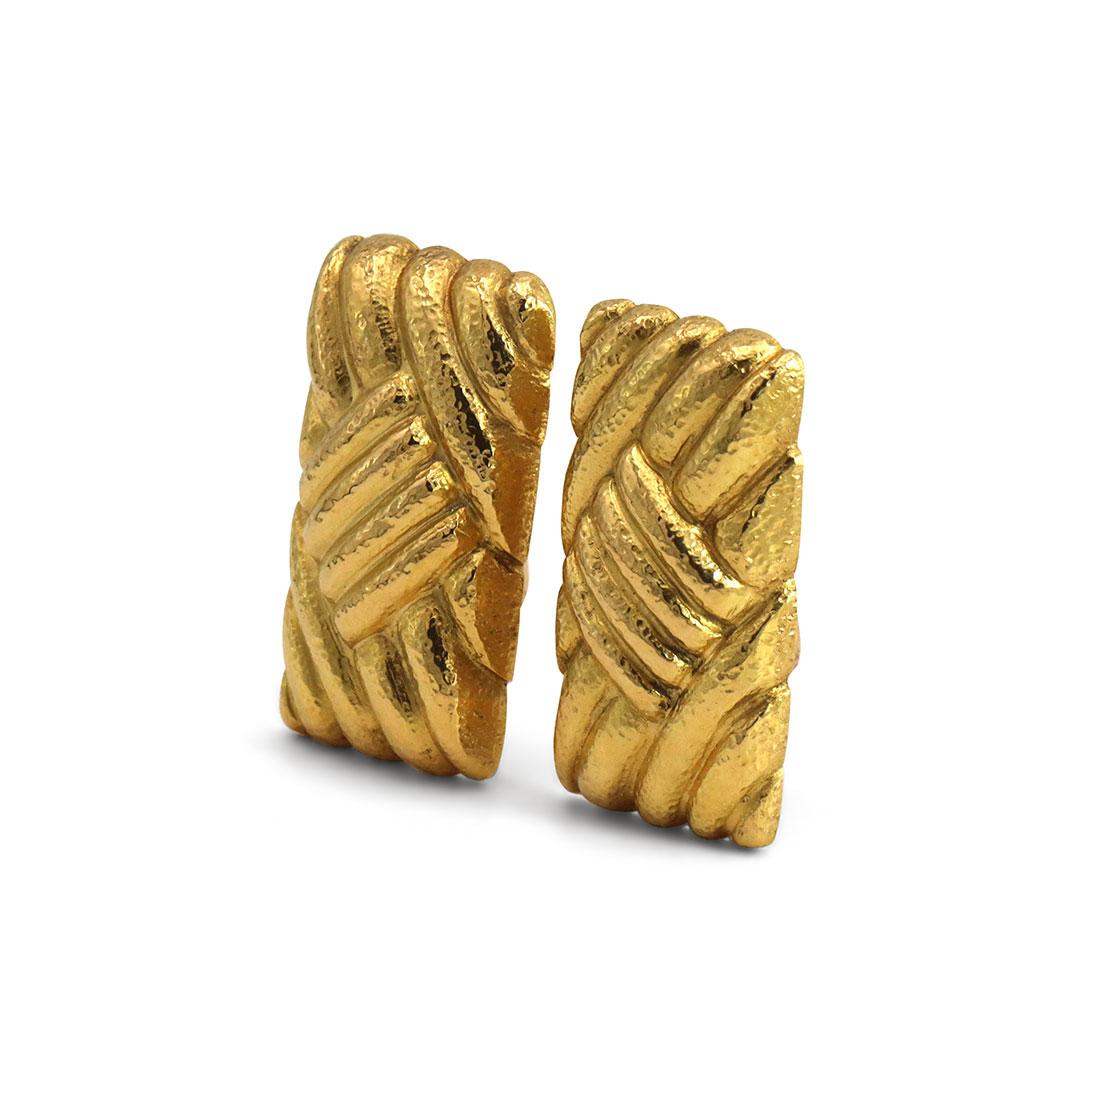 Authentic Lalaounis vintage earrings crafted in 18 karat yellow gold. These glamorous earrings feature a textured gold geometric design with clip back closures for non-pierced ears. At its widest point, the earrings measures  1.19 inches x .65